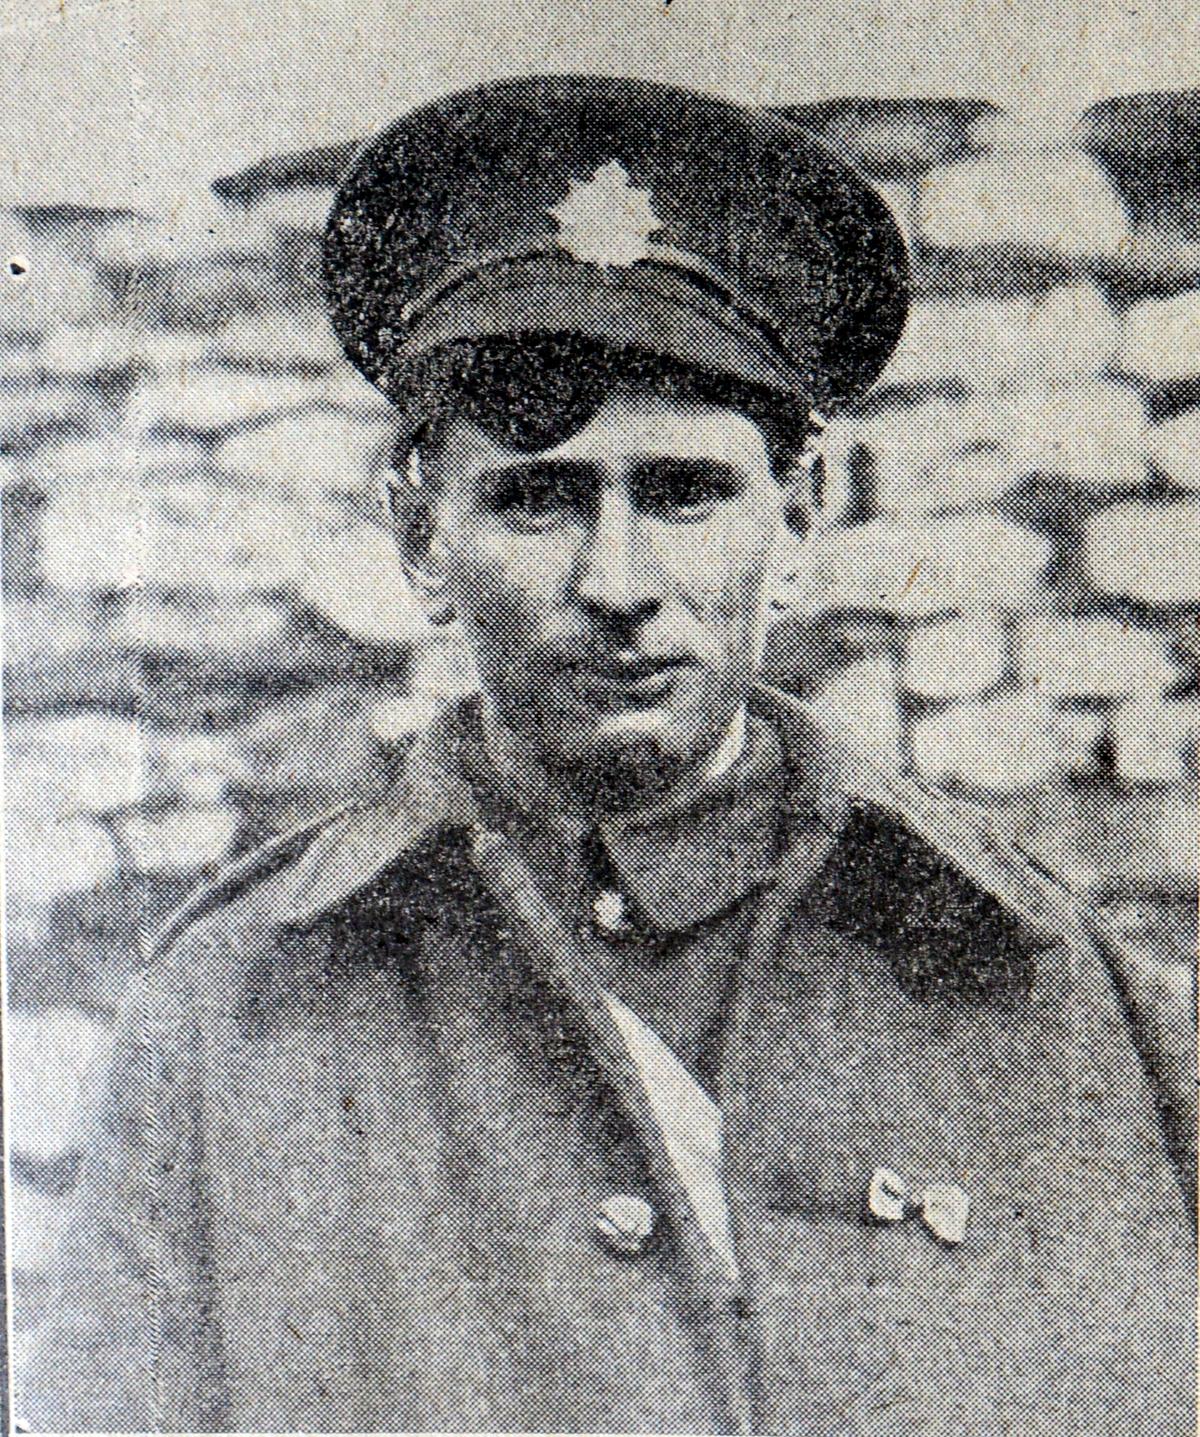 Private William Procter, of Kendal, who falsely claimed to have won the VC